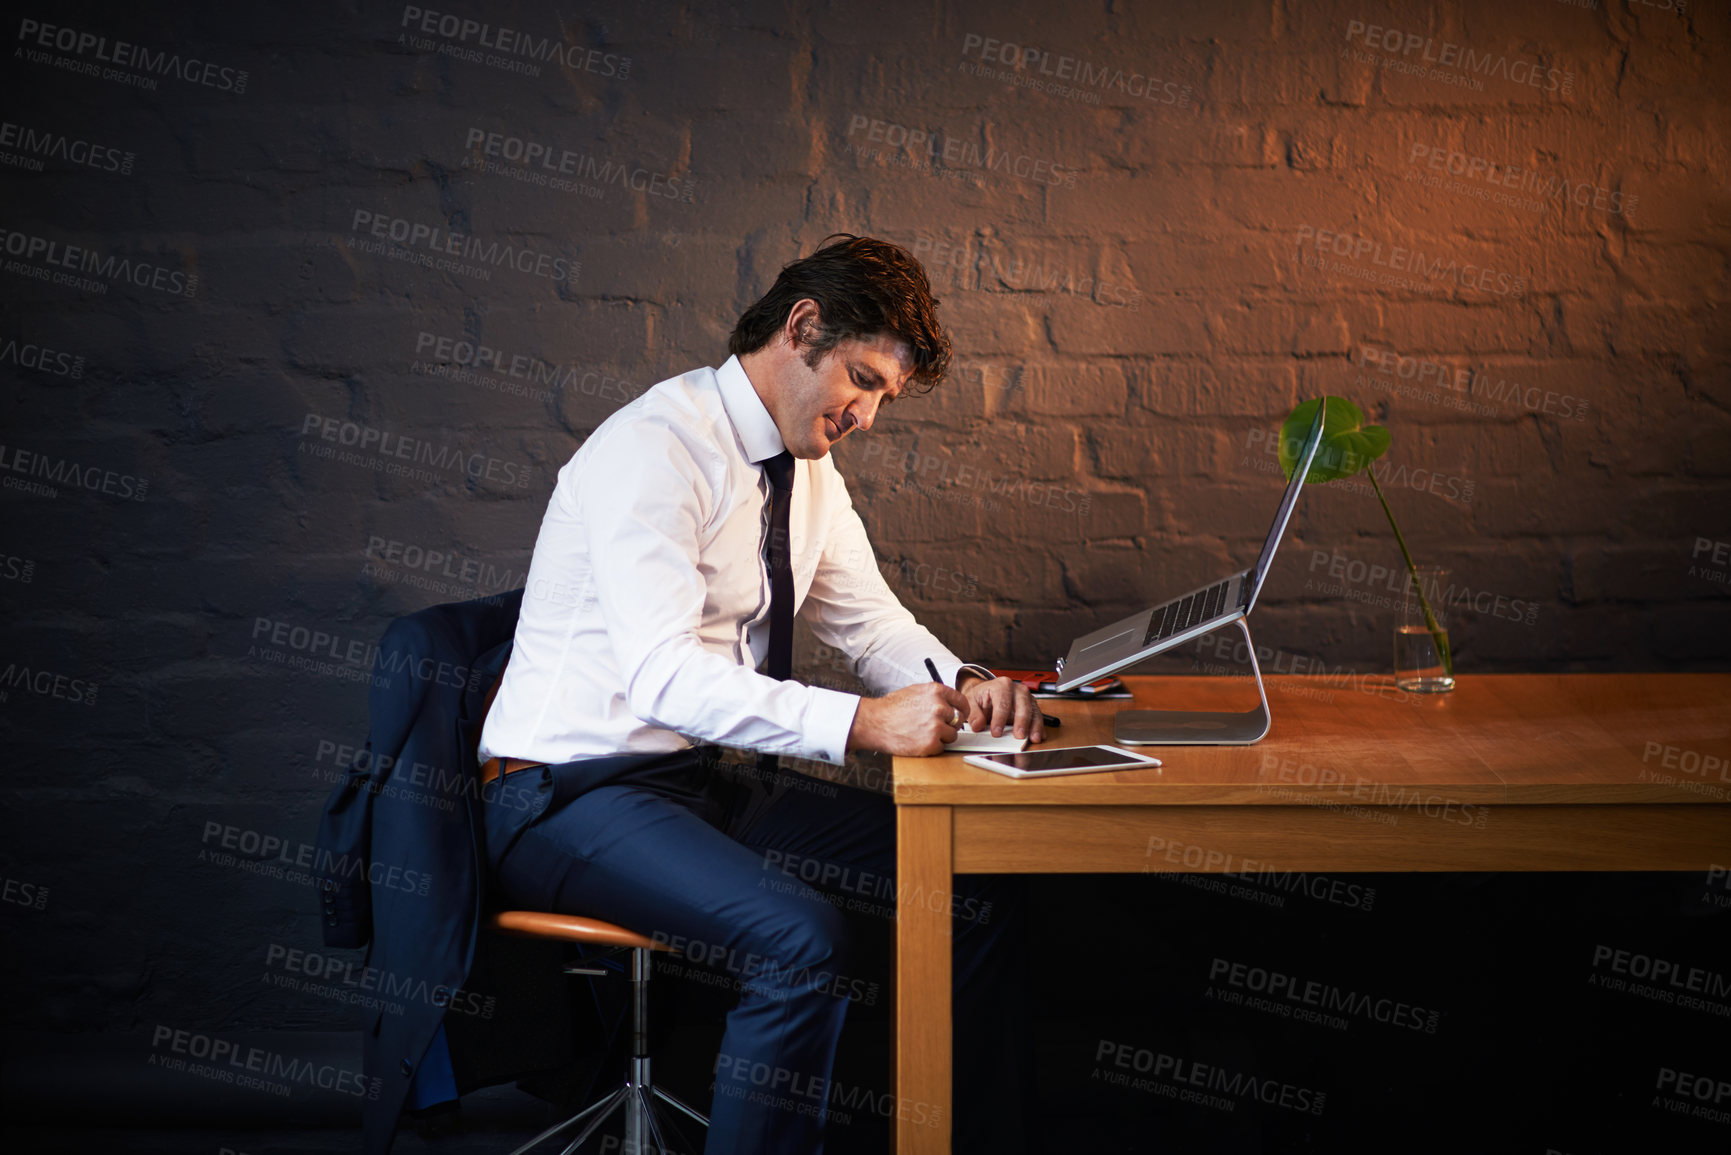 Buy stock photo Shot of a businessman working late at the office